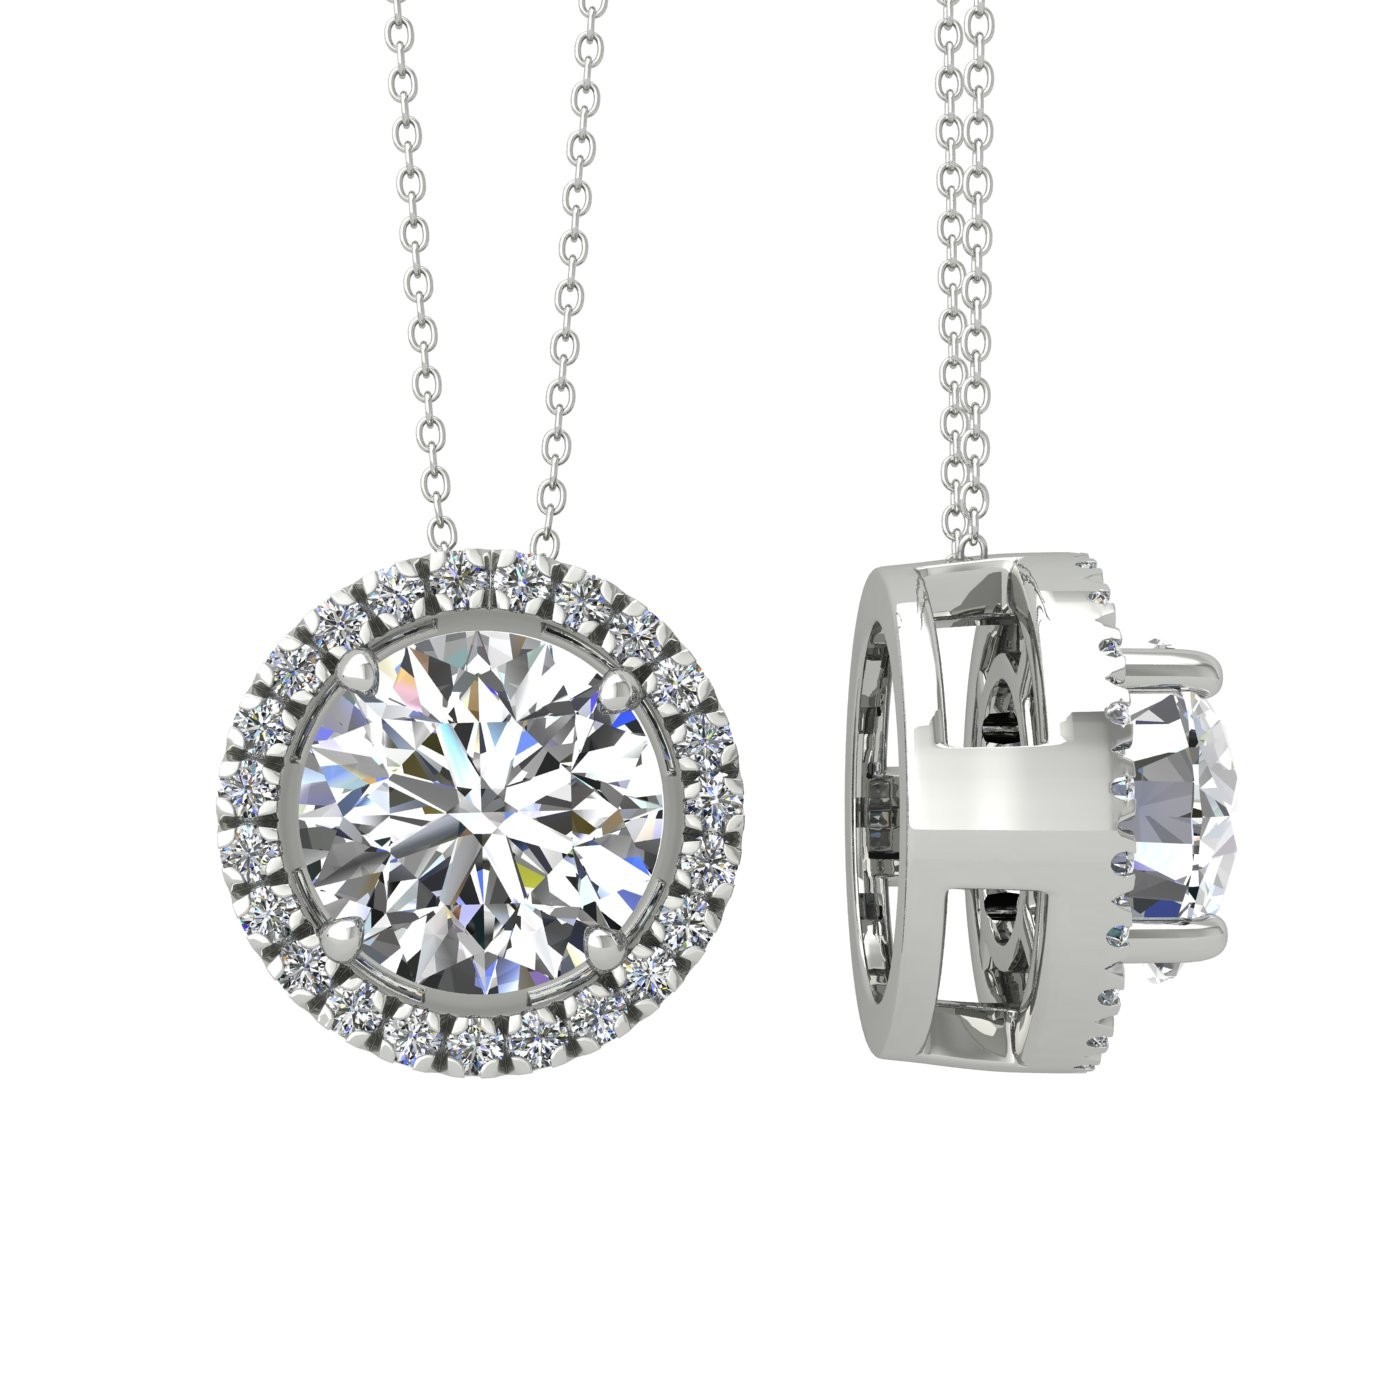 18K WHITE GOLD 4 PRONG ROUND SHAPE DIAMOND PENDANT WITH DIAMOND PAVÉ SET HALO INCLUDING CHAIN SEPERATE FROM THE PENDANT